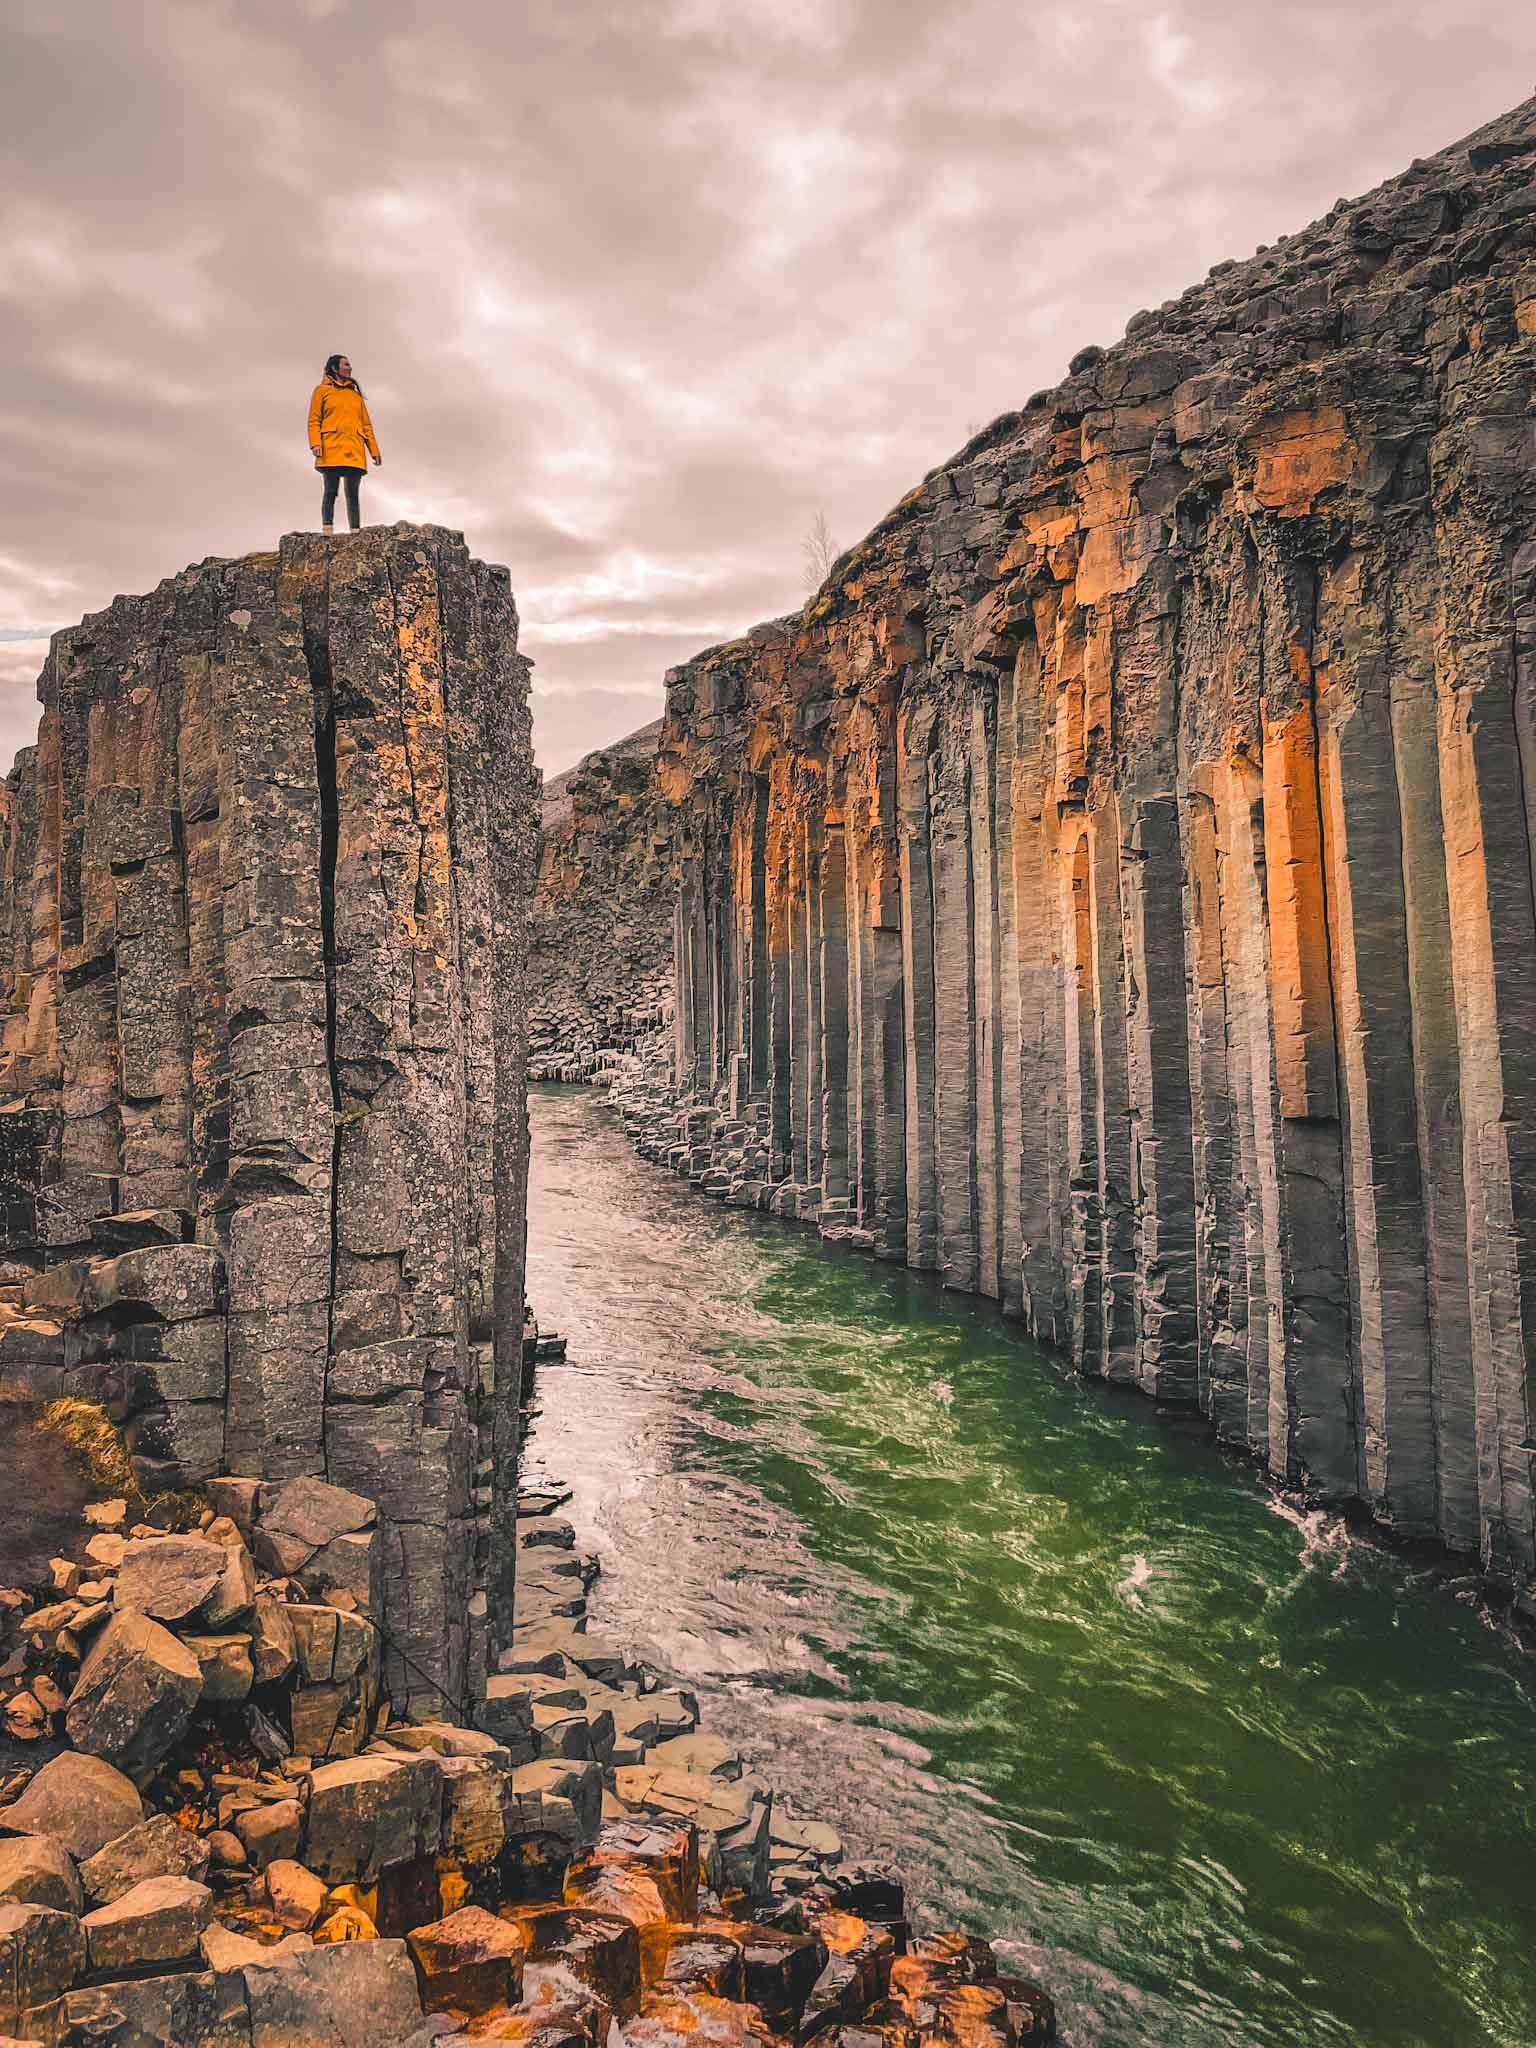 Studlagil canyon in Iceland